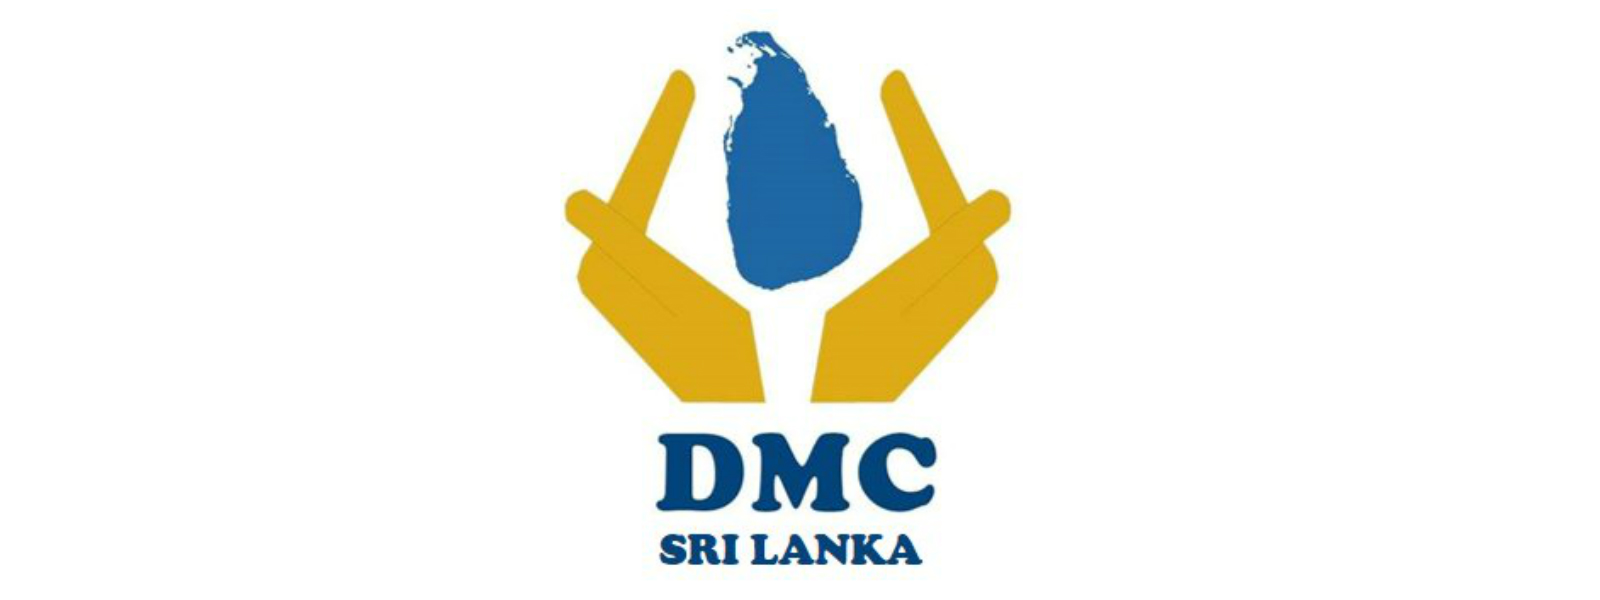 DMC working with military to restore normalcy